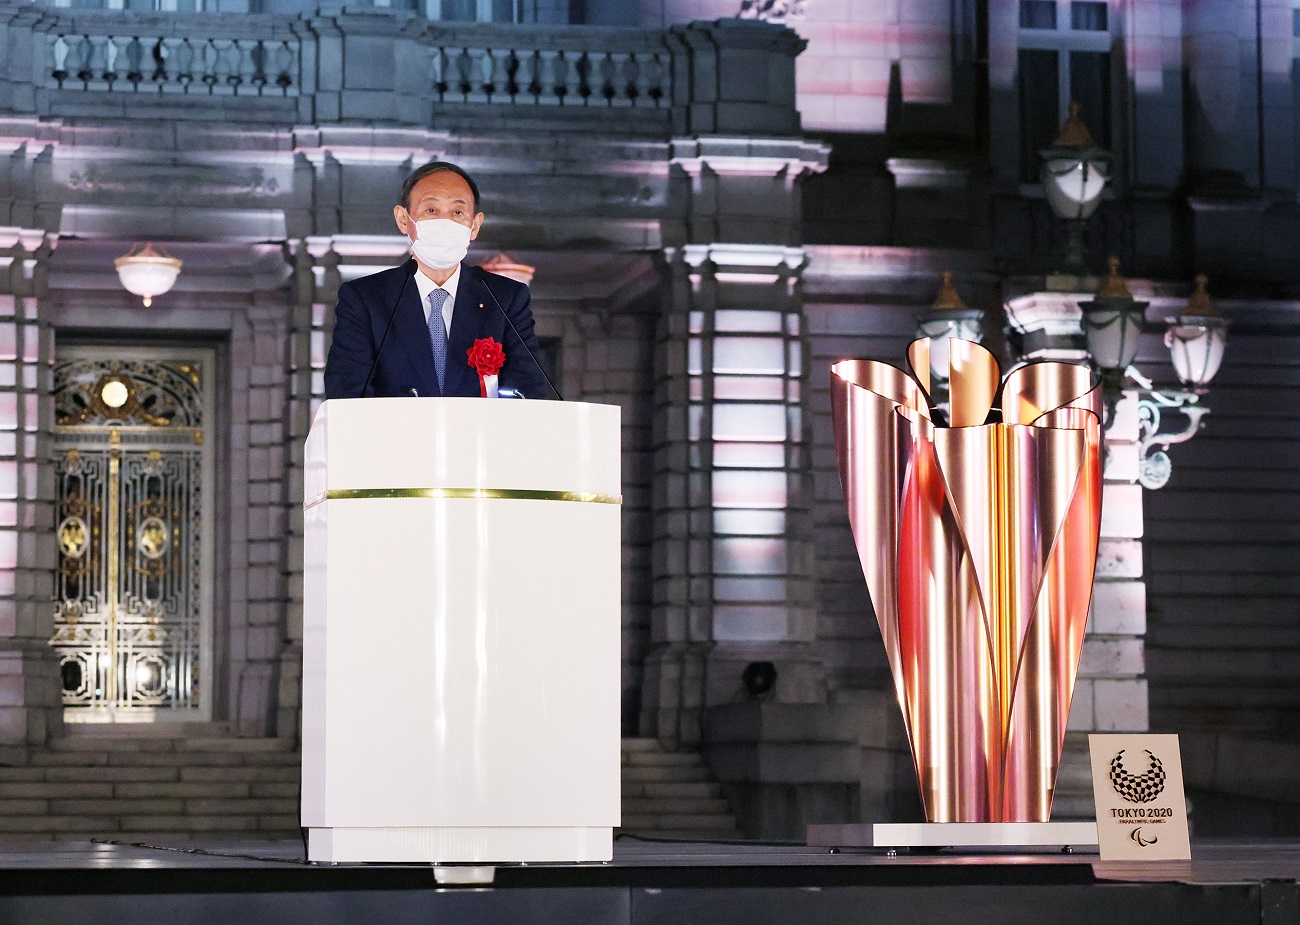 Flame Gathering Event of the Tokyo 2020 Paralympic Games (1)